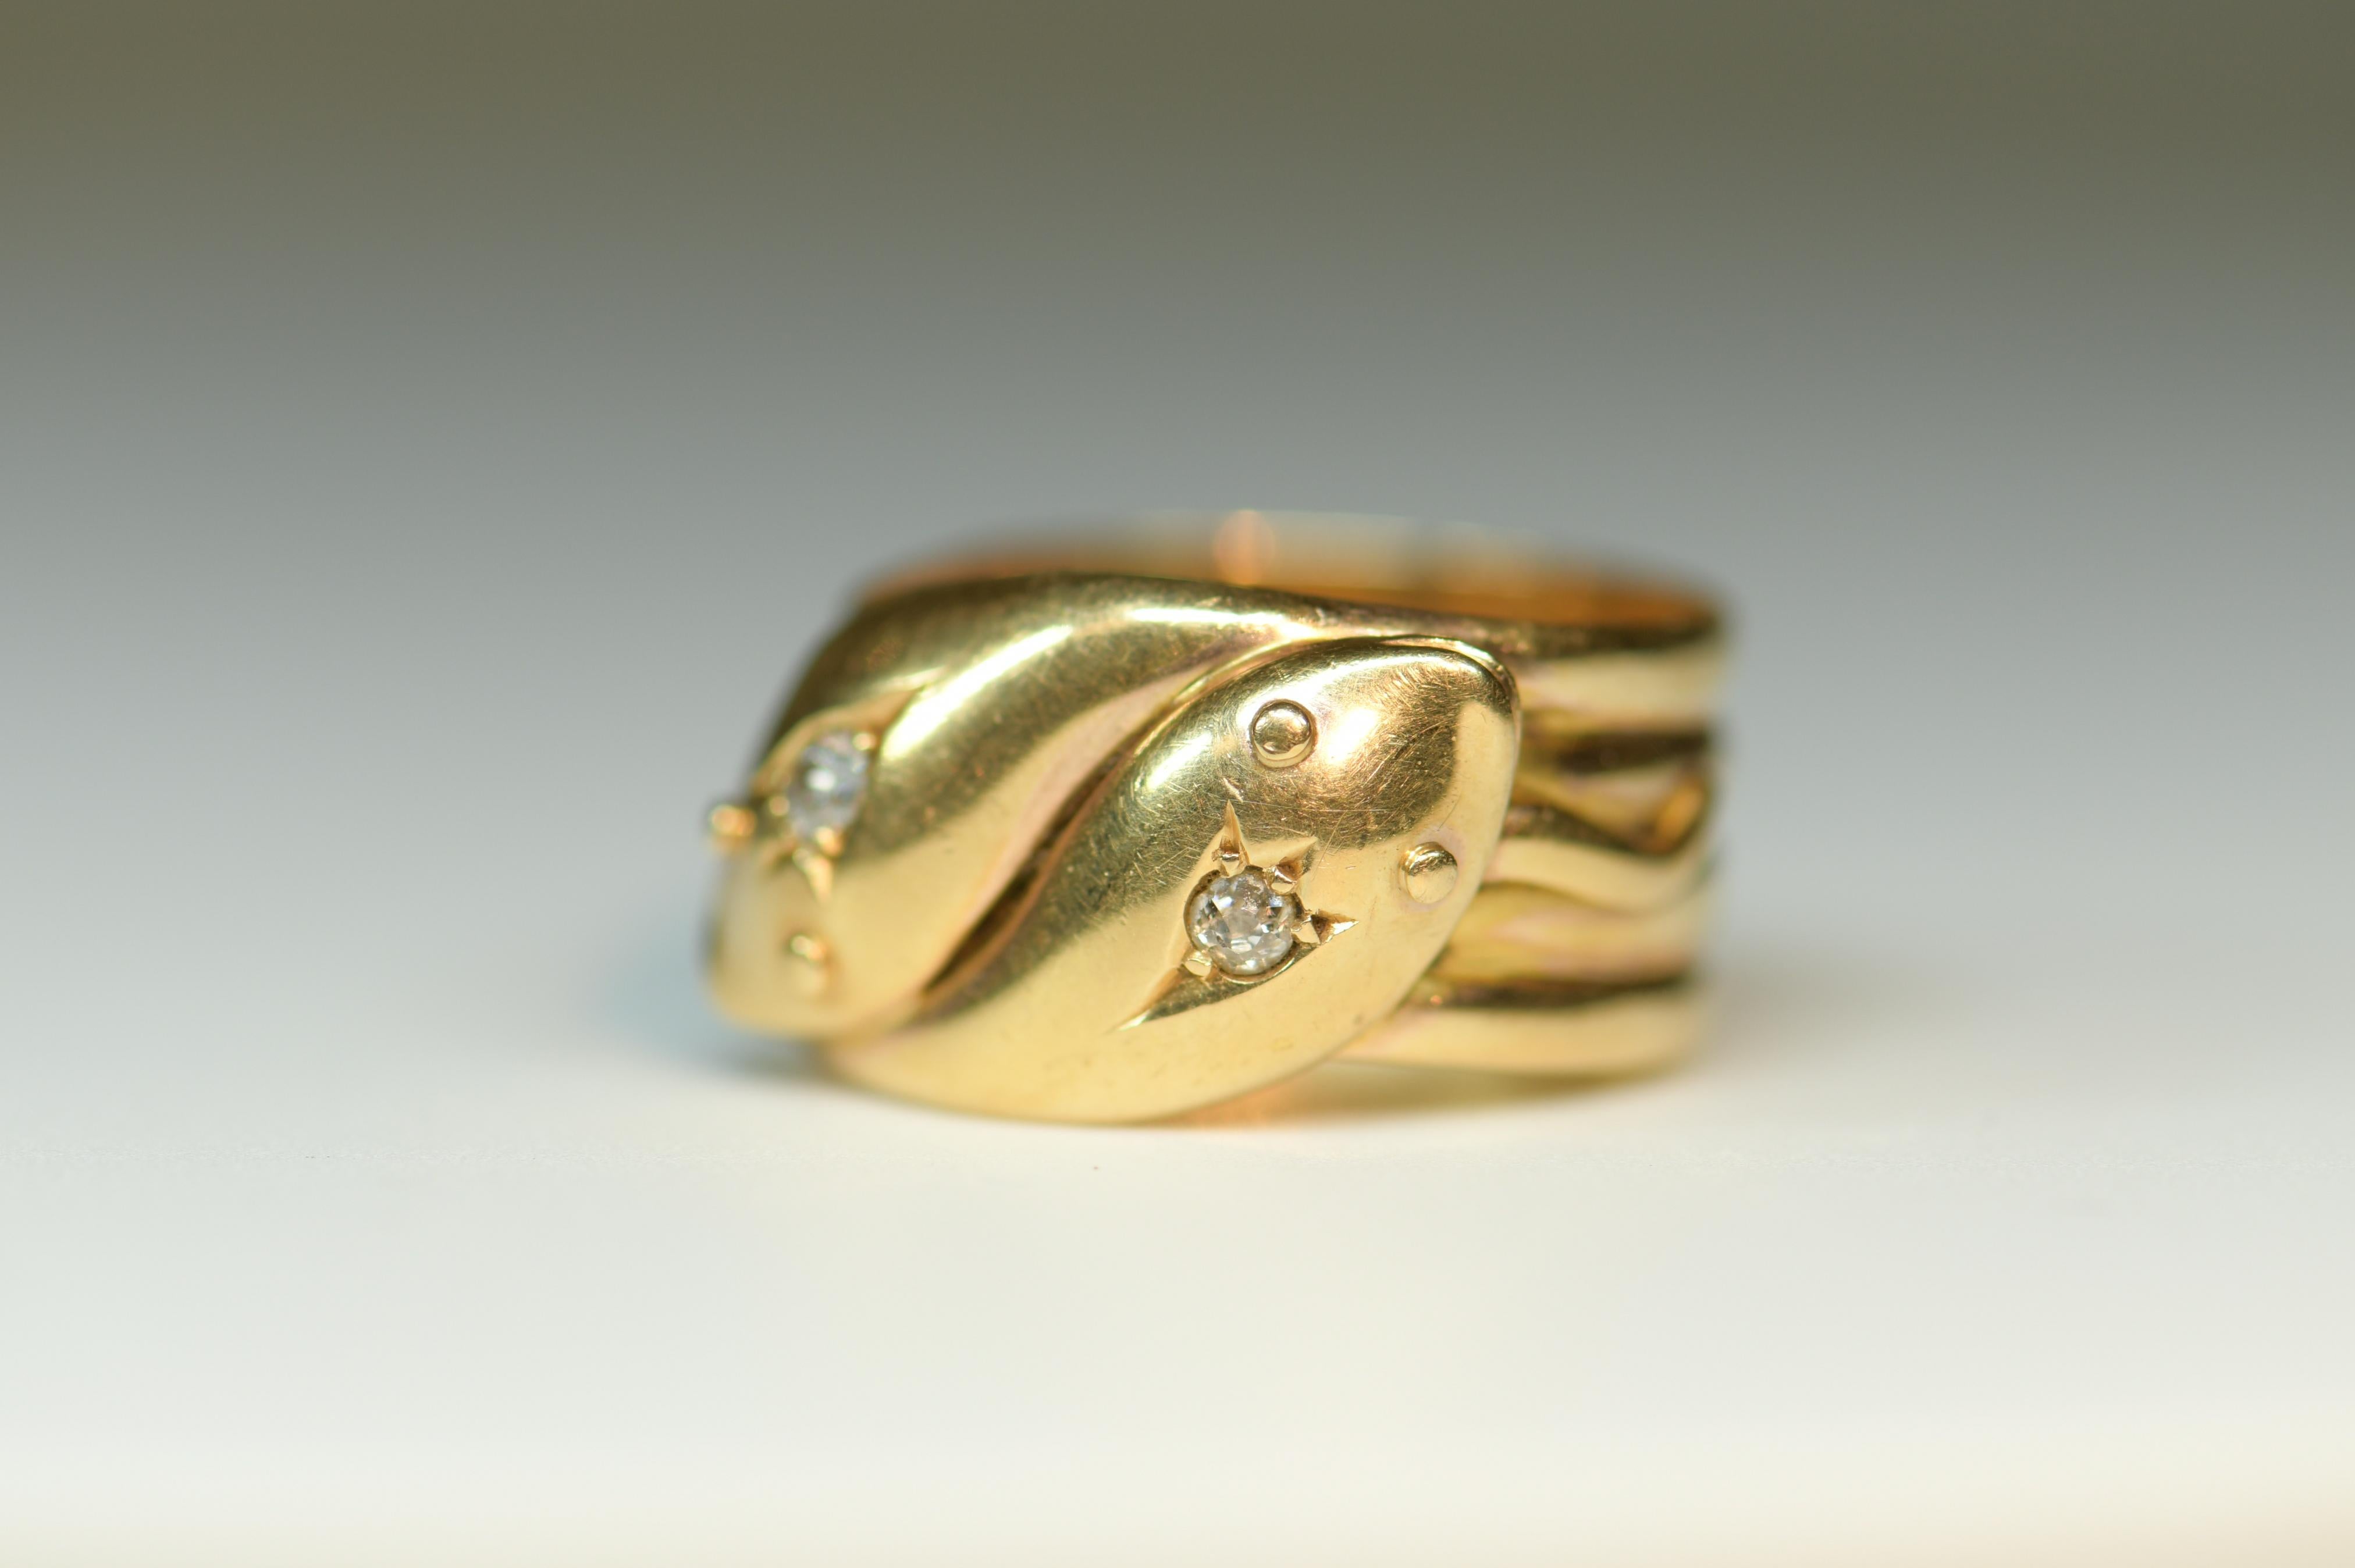 A charming 18ct gold snake ring. The snake’s eyes are set with small diamonds. The snake motif in antique jewelry represented “Eternal love and wisdom”, so this ring with it’s two entwined snakes represented the love between two people. What a